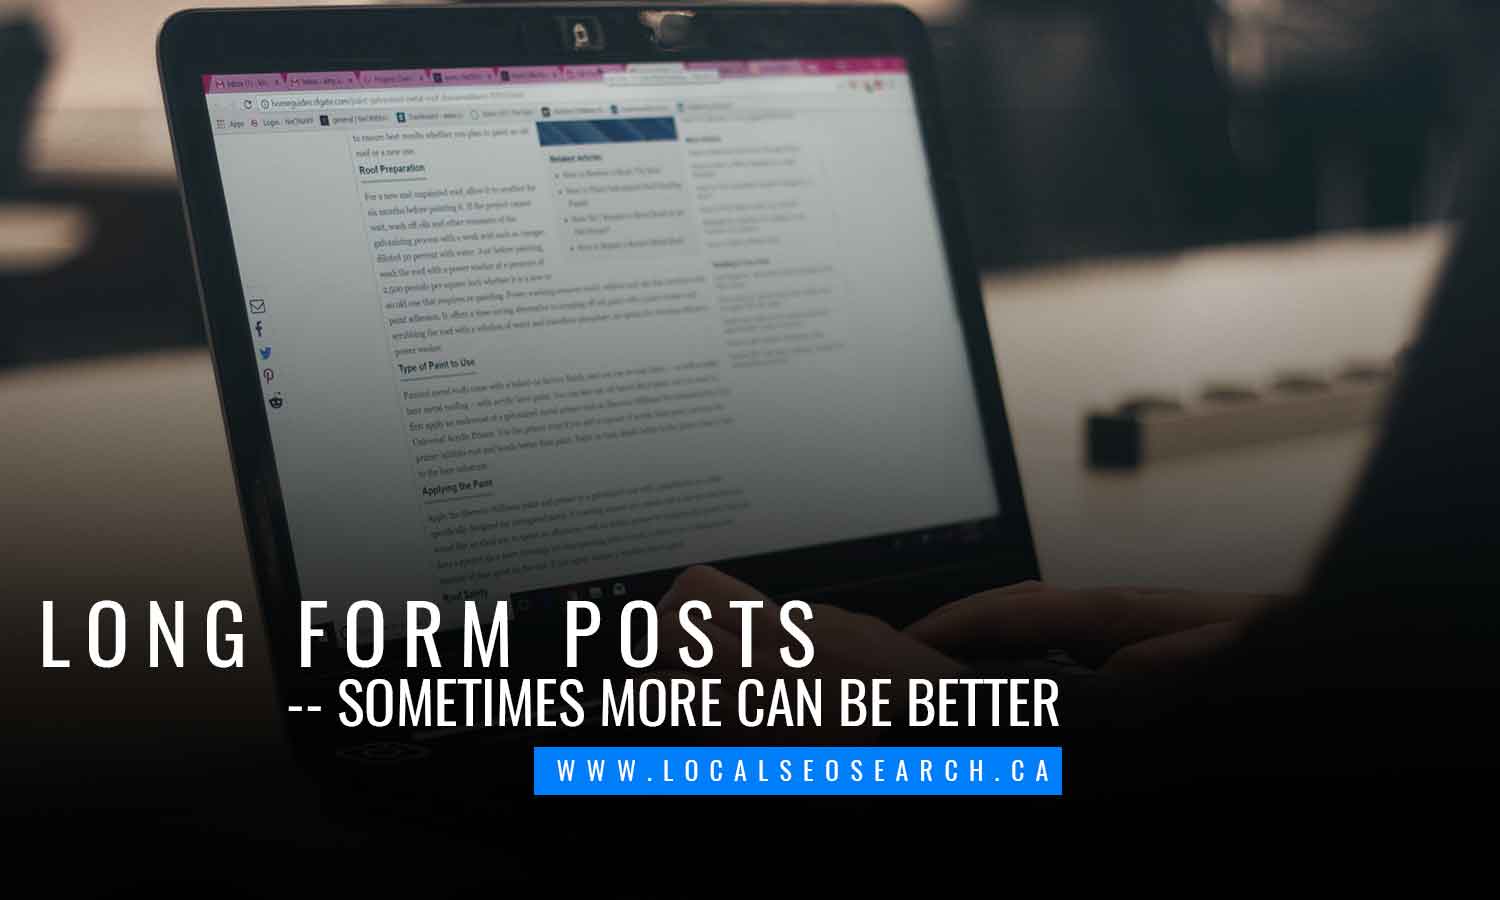 Long form posts sometimes more can be better